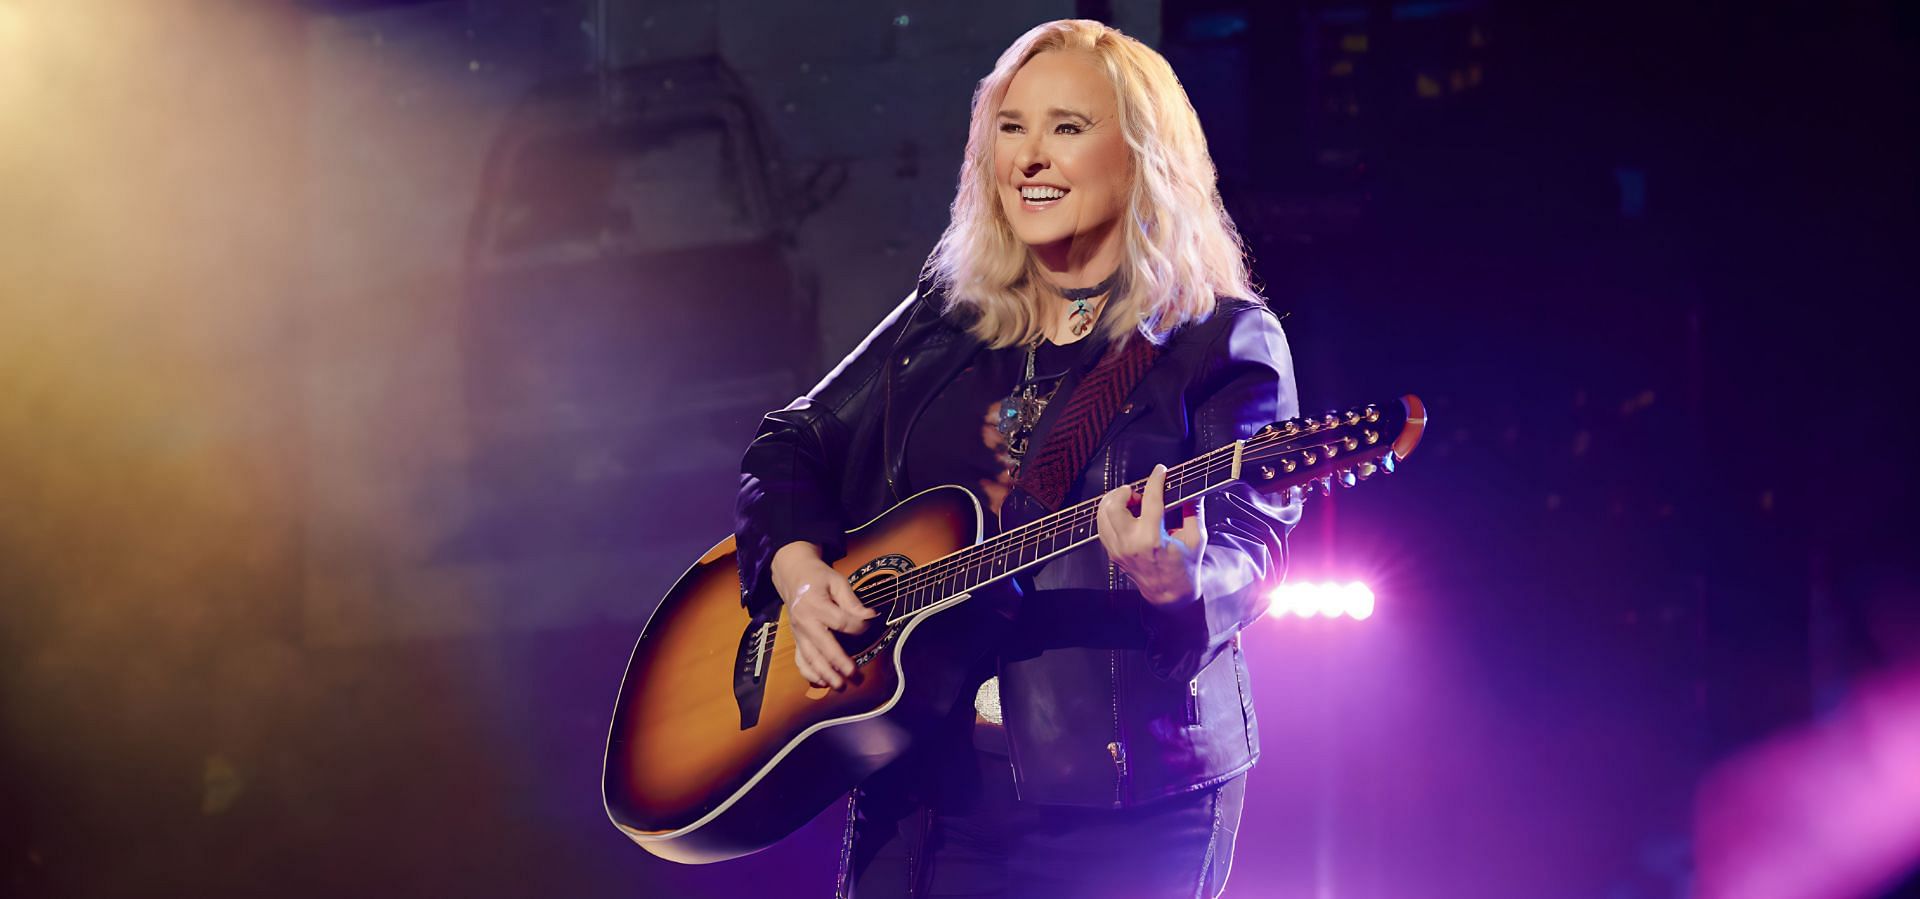 Melissa Etheridge Tour 2023 Tickets, dates, venues and more